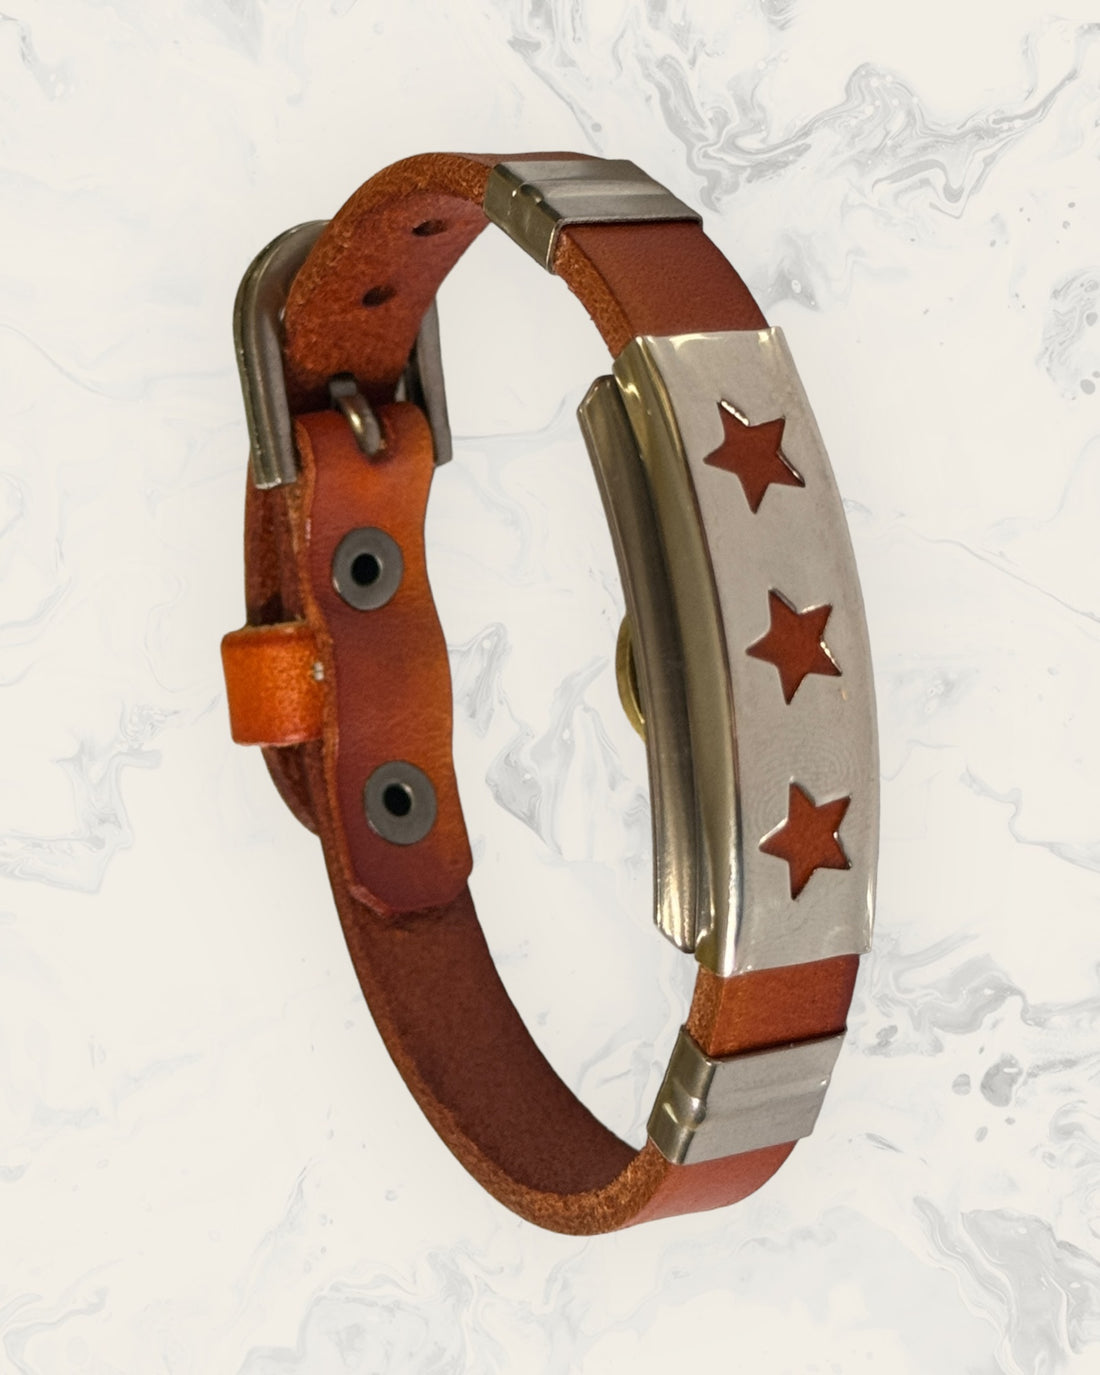 Natural Pain Relief and EMF Protection Bracelet Leather Band Color Burnt Orange with a Star design on a silver metal slider